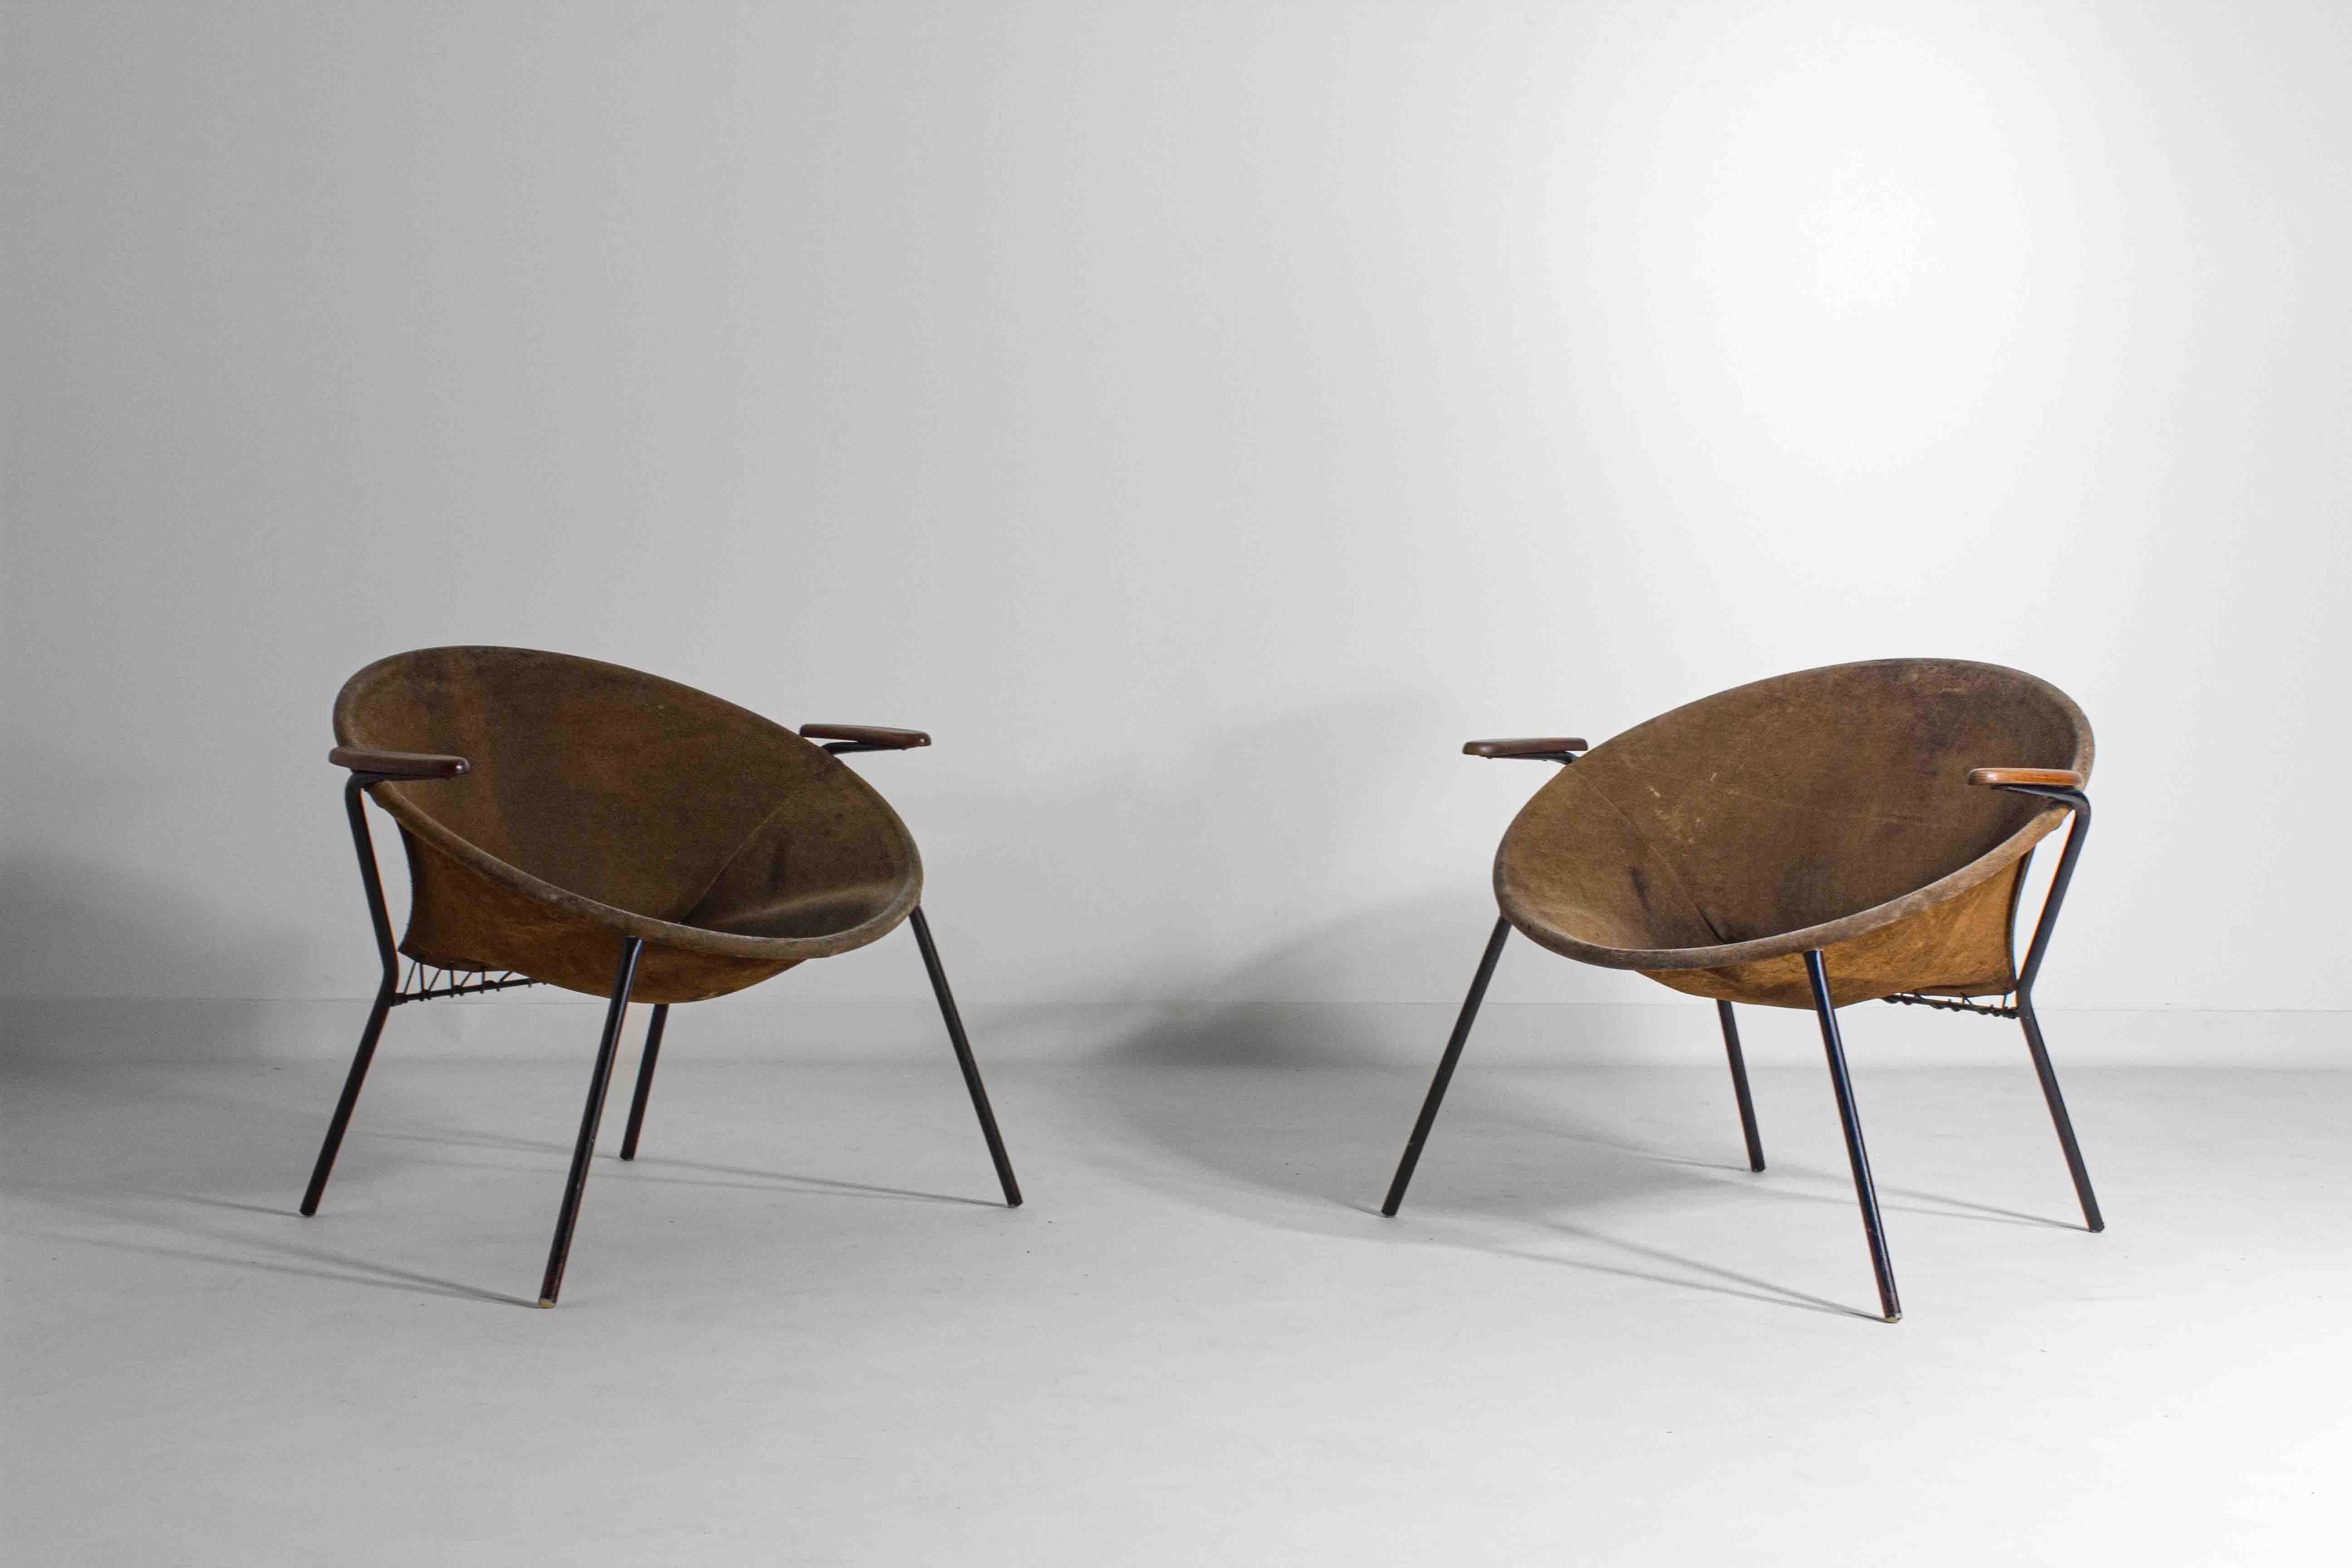 Lovely set of two original Balloon chairs by Hans Olsen in beautifully patinated leather

